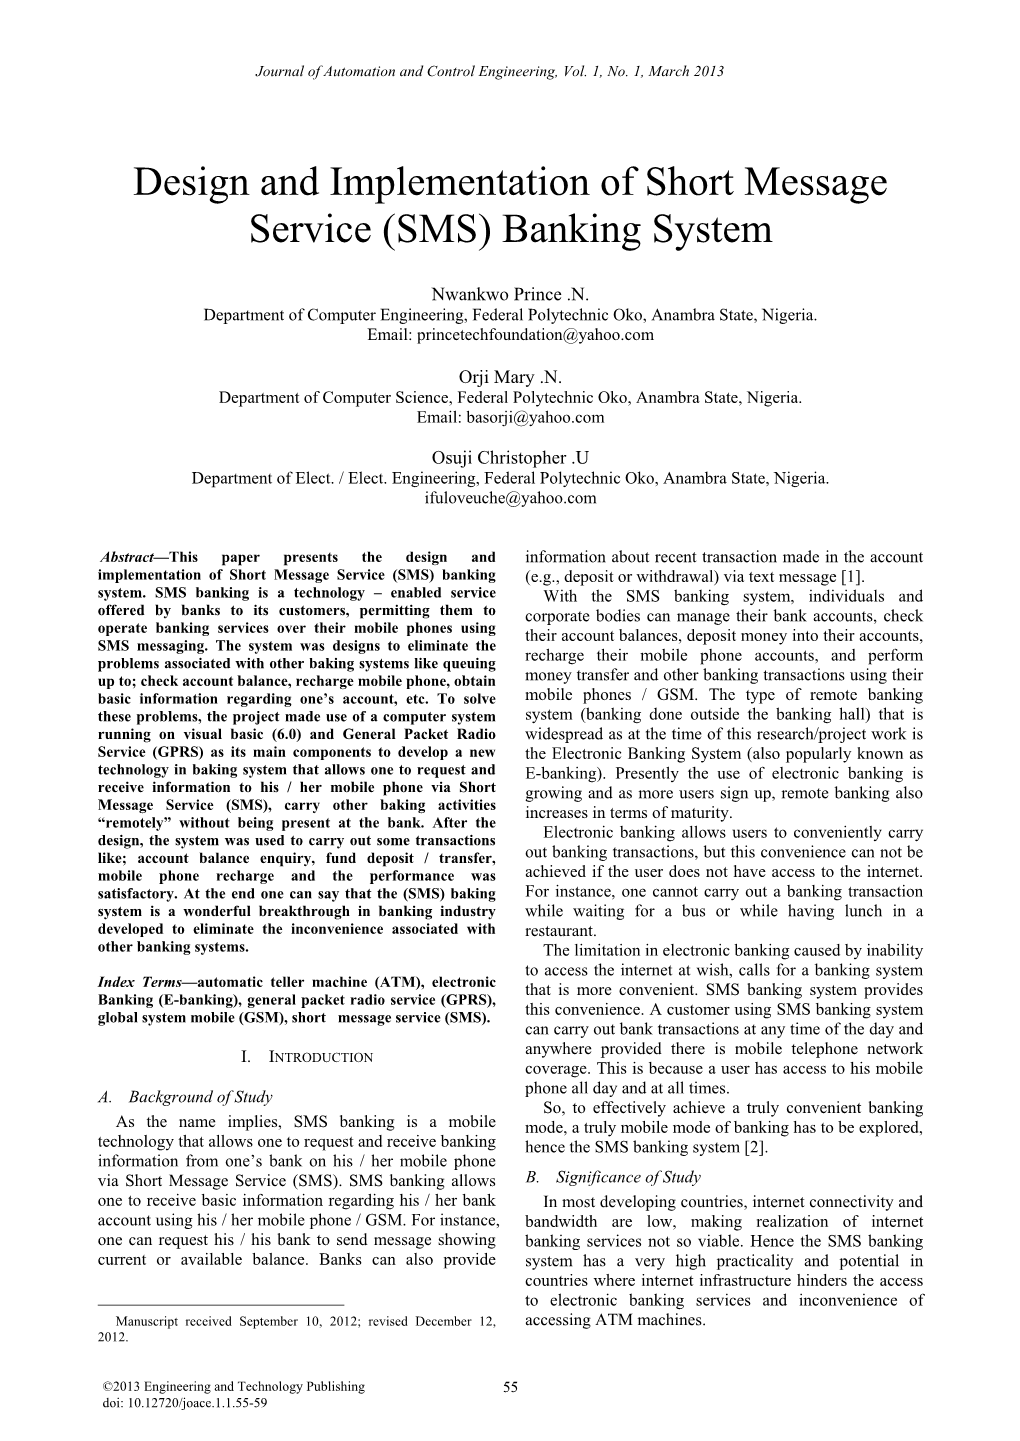 Design and Implementation of Short Message Service (SMS) Banking System